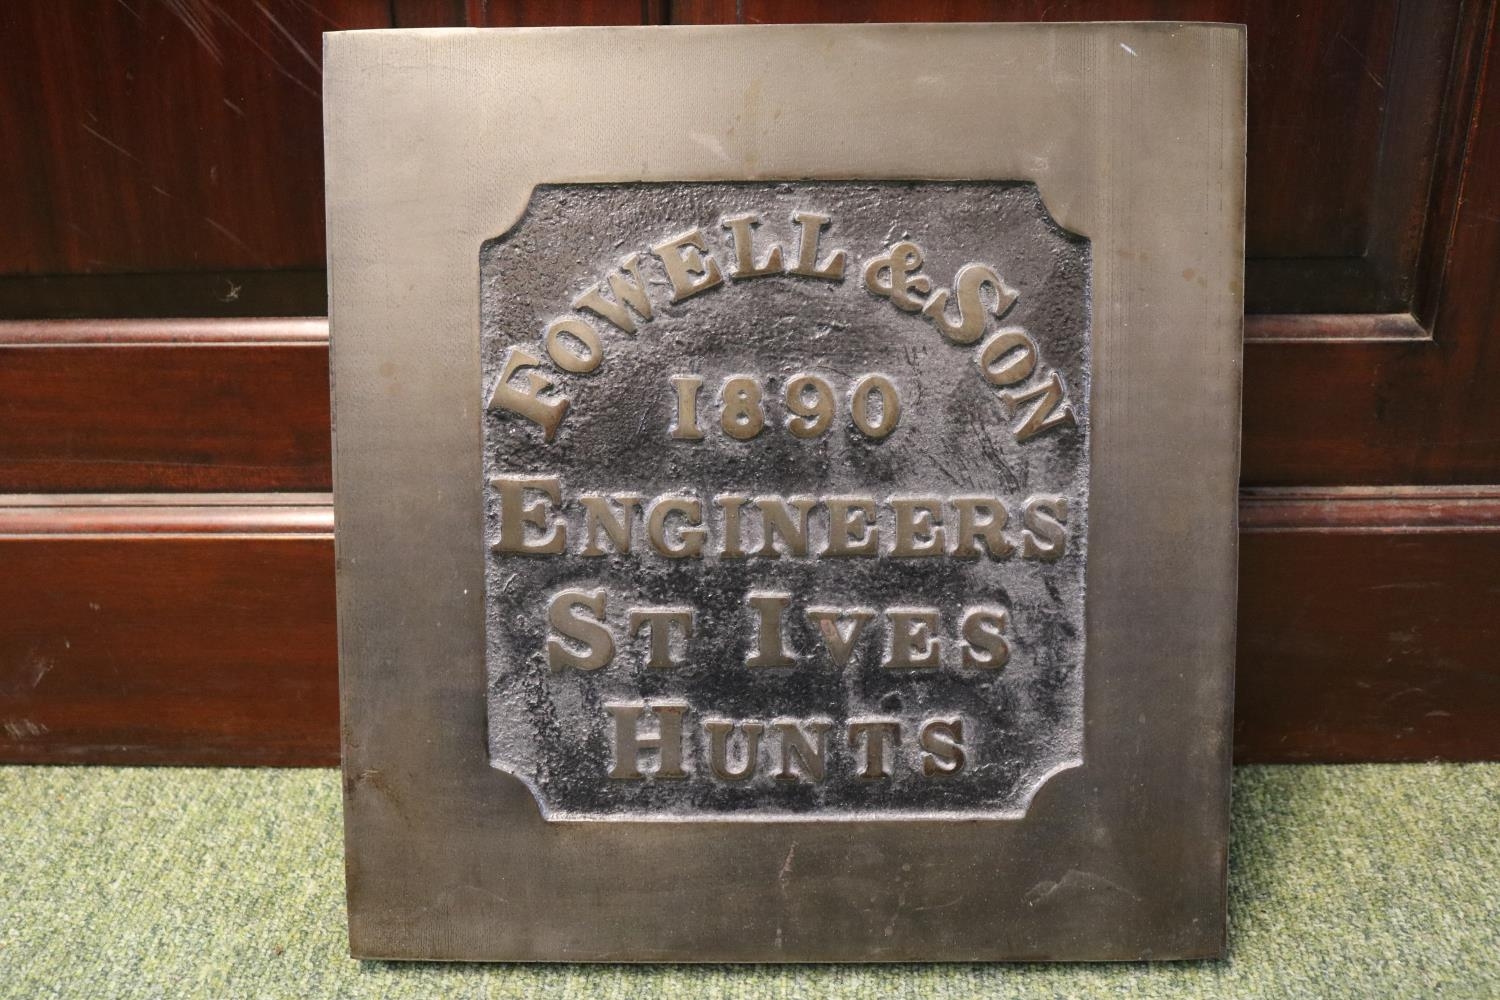 Fowell & Son 1890 Engineers St Ives Hunts Cast Iron Traction Engine Plaque. Fowell & Sons of - Image 2 of 2